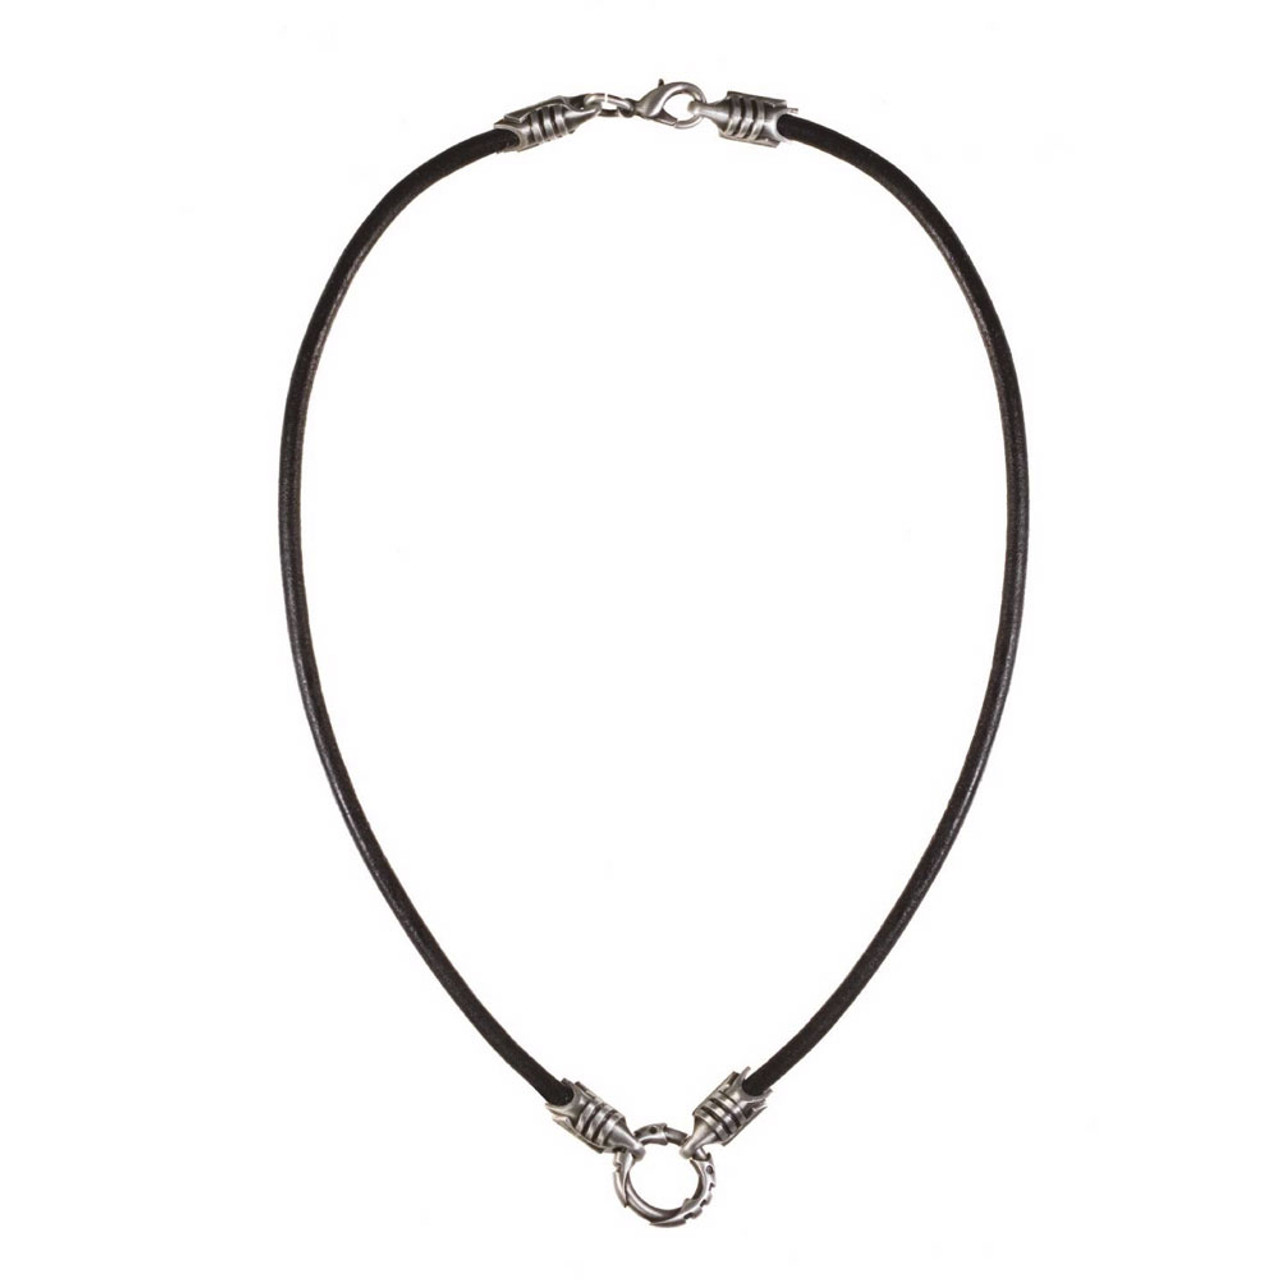 BICO Pacific Black Leather Cord Necklace Pewter Ends